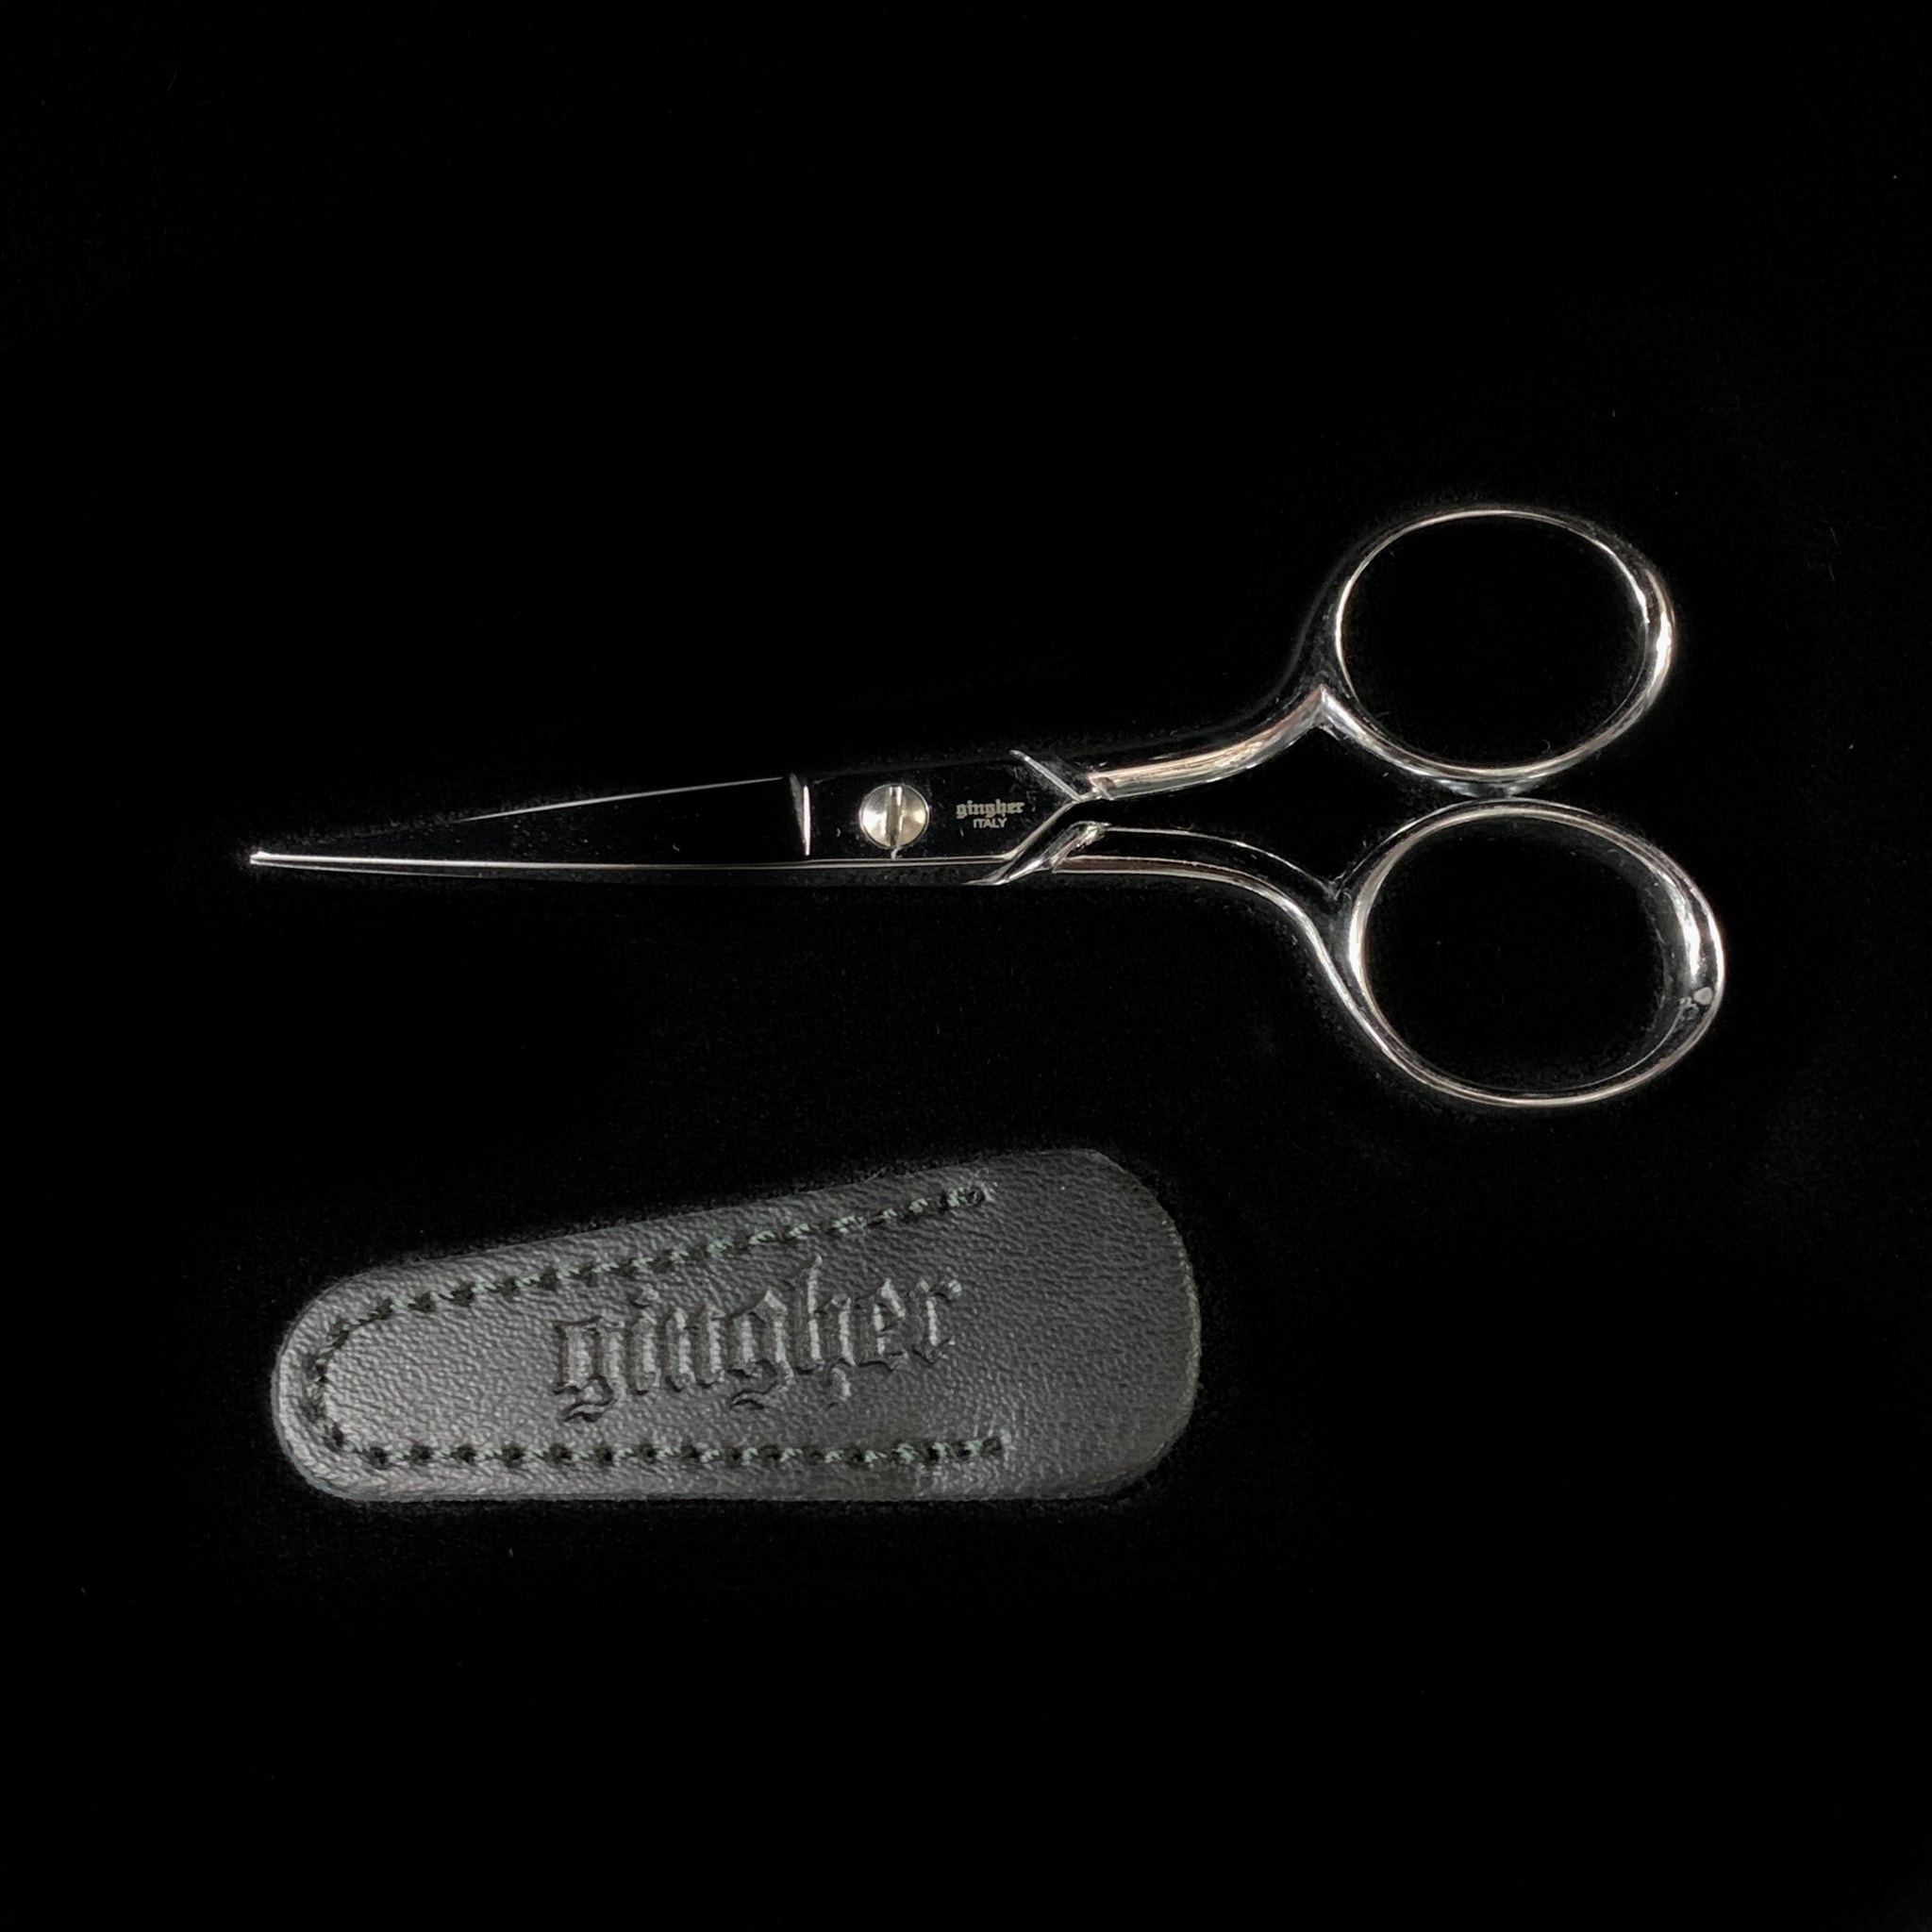 Gingher 4 Classic Embroidery Scissors